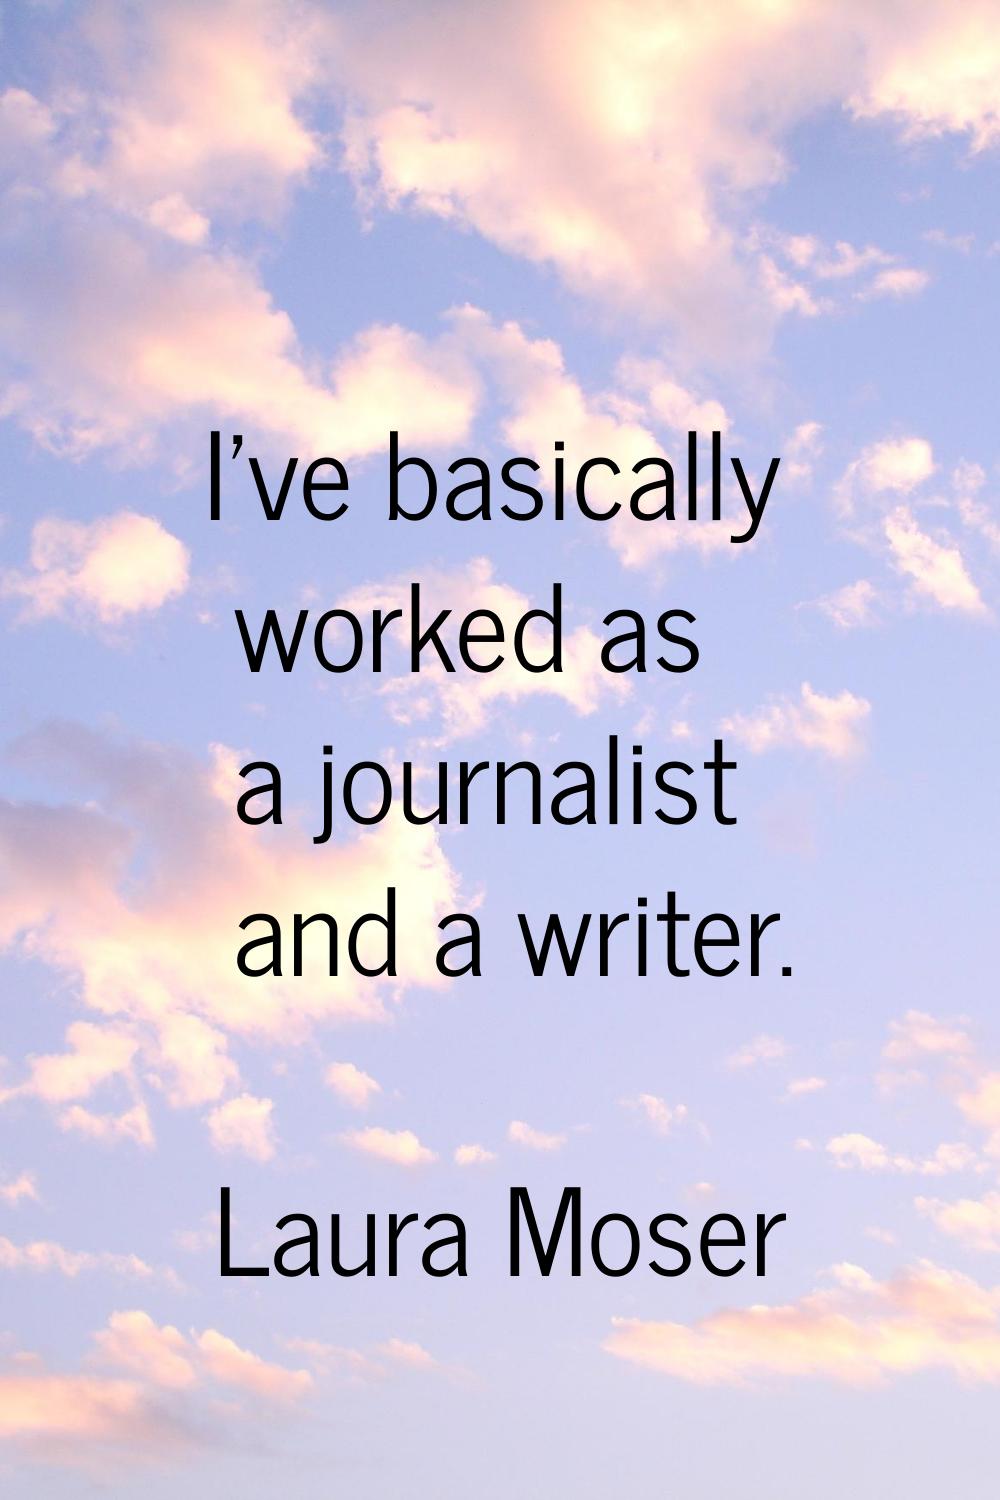 I've basically worked as a journalist and a writer.